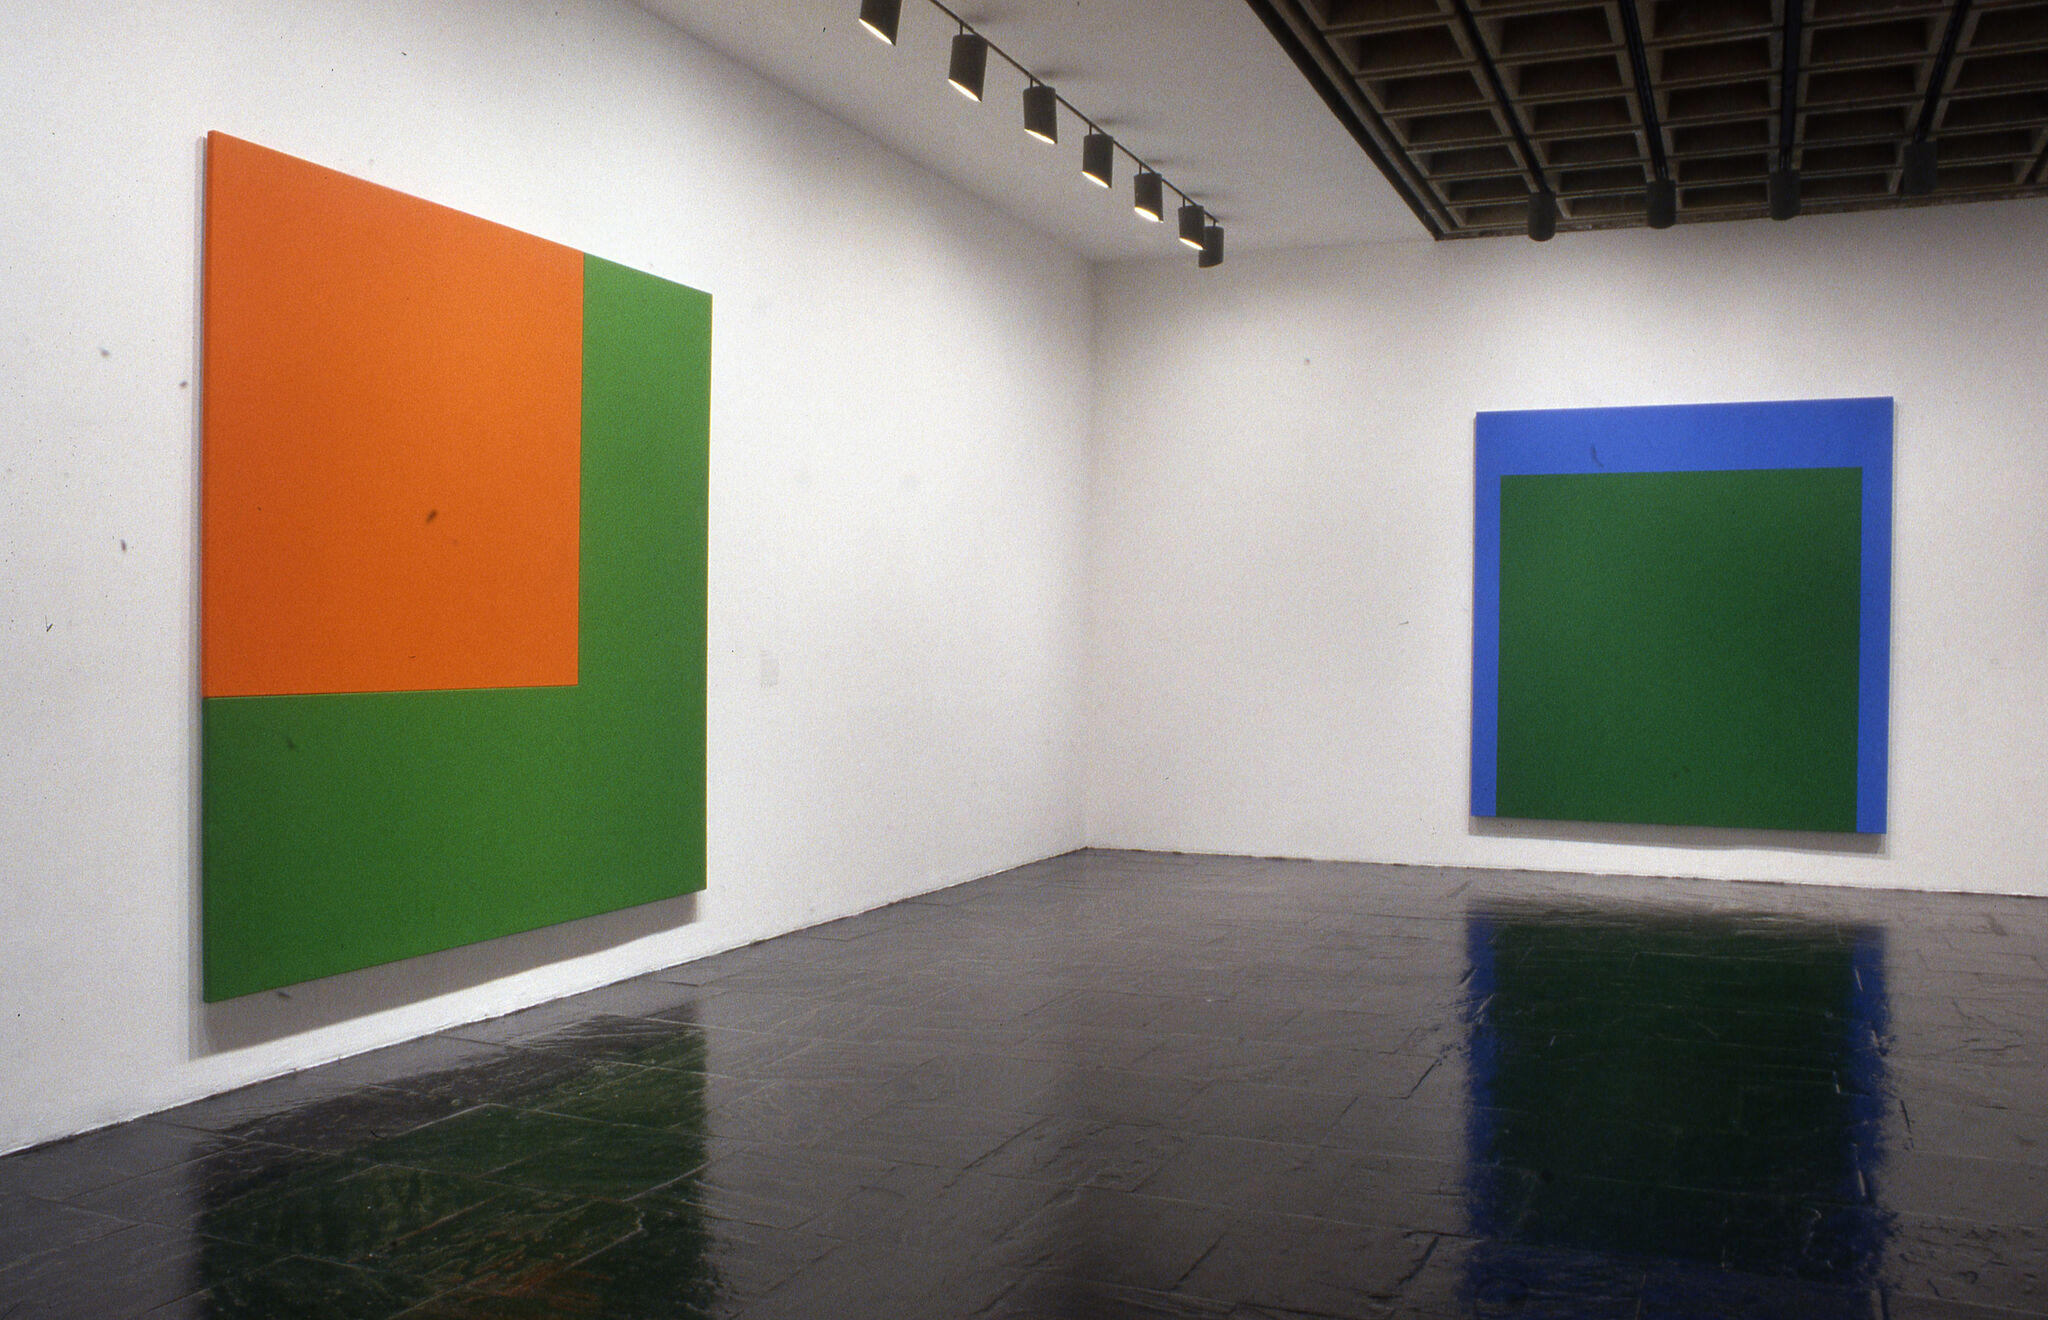 Two large square abstract paintings displayed on the walls of a gallery.